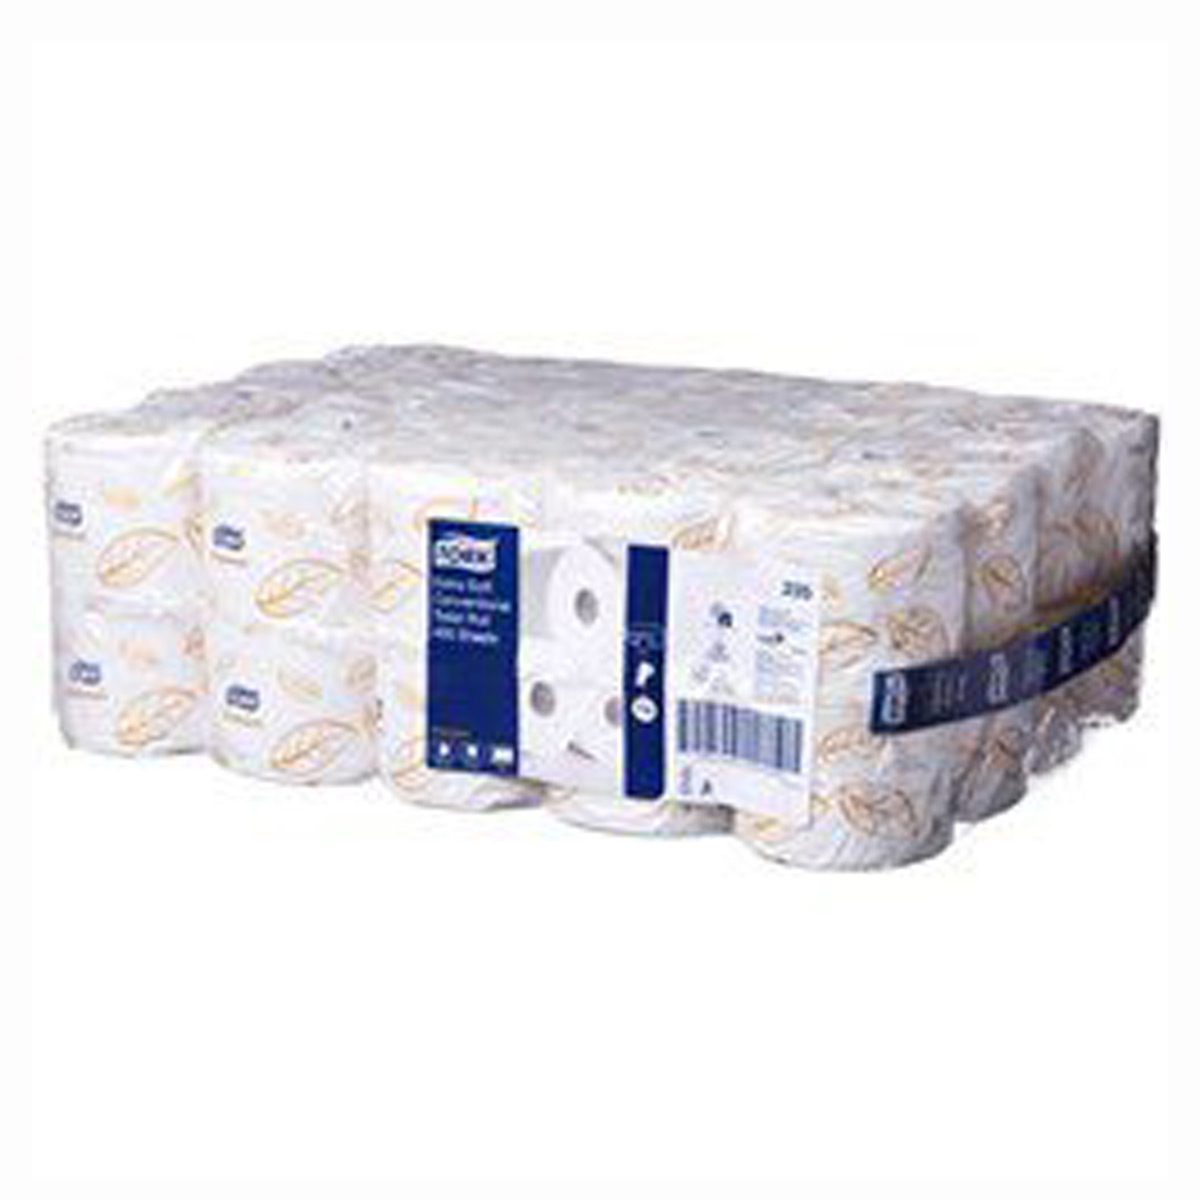 paper-products-toilet-paper-tork-toilet-paper-wrapped-2ply-400s-48-rolls-t4-consistent-high-quality-and-value-features-quilt-emboss-extra-softness-vjs-distributors-234